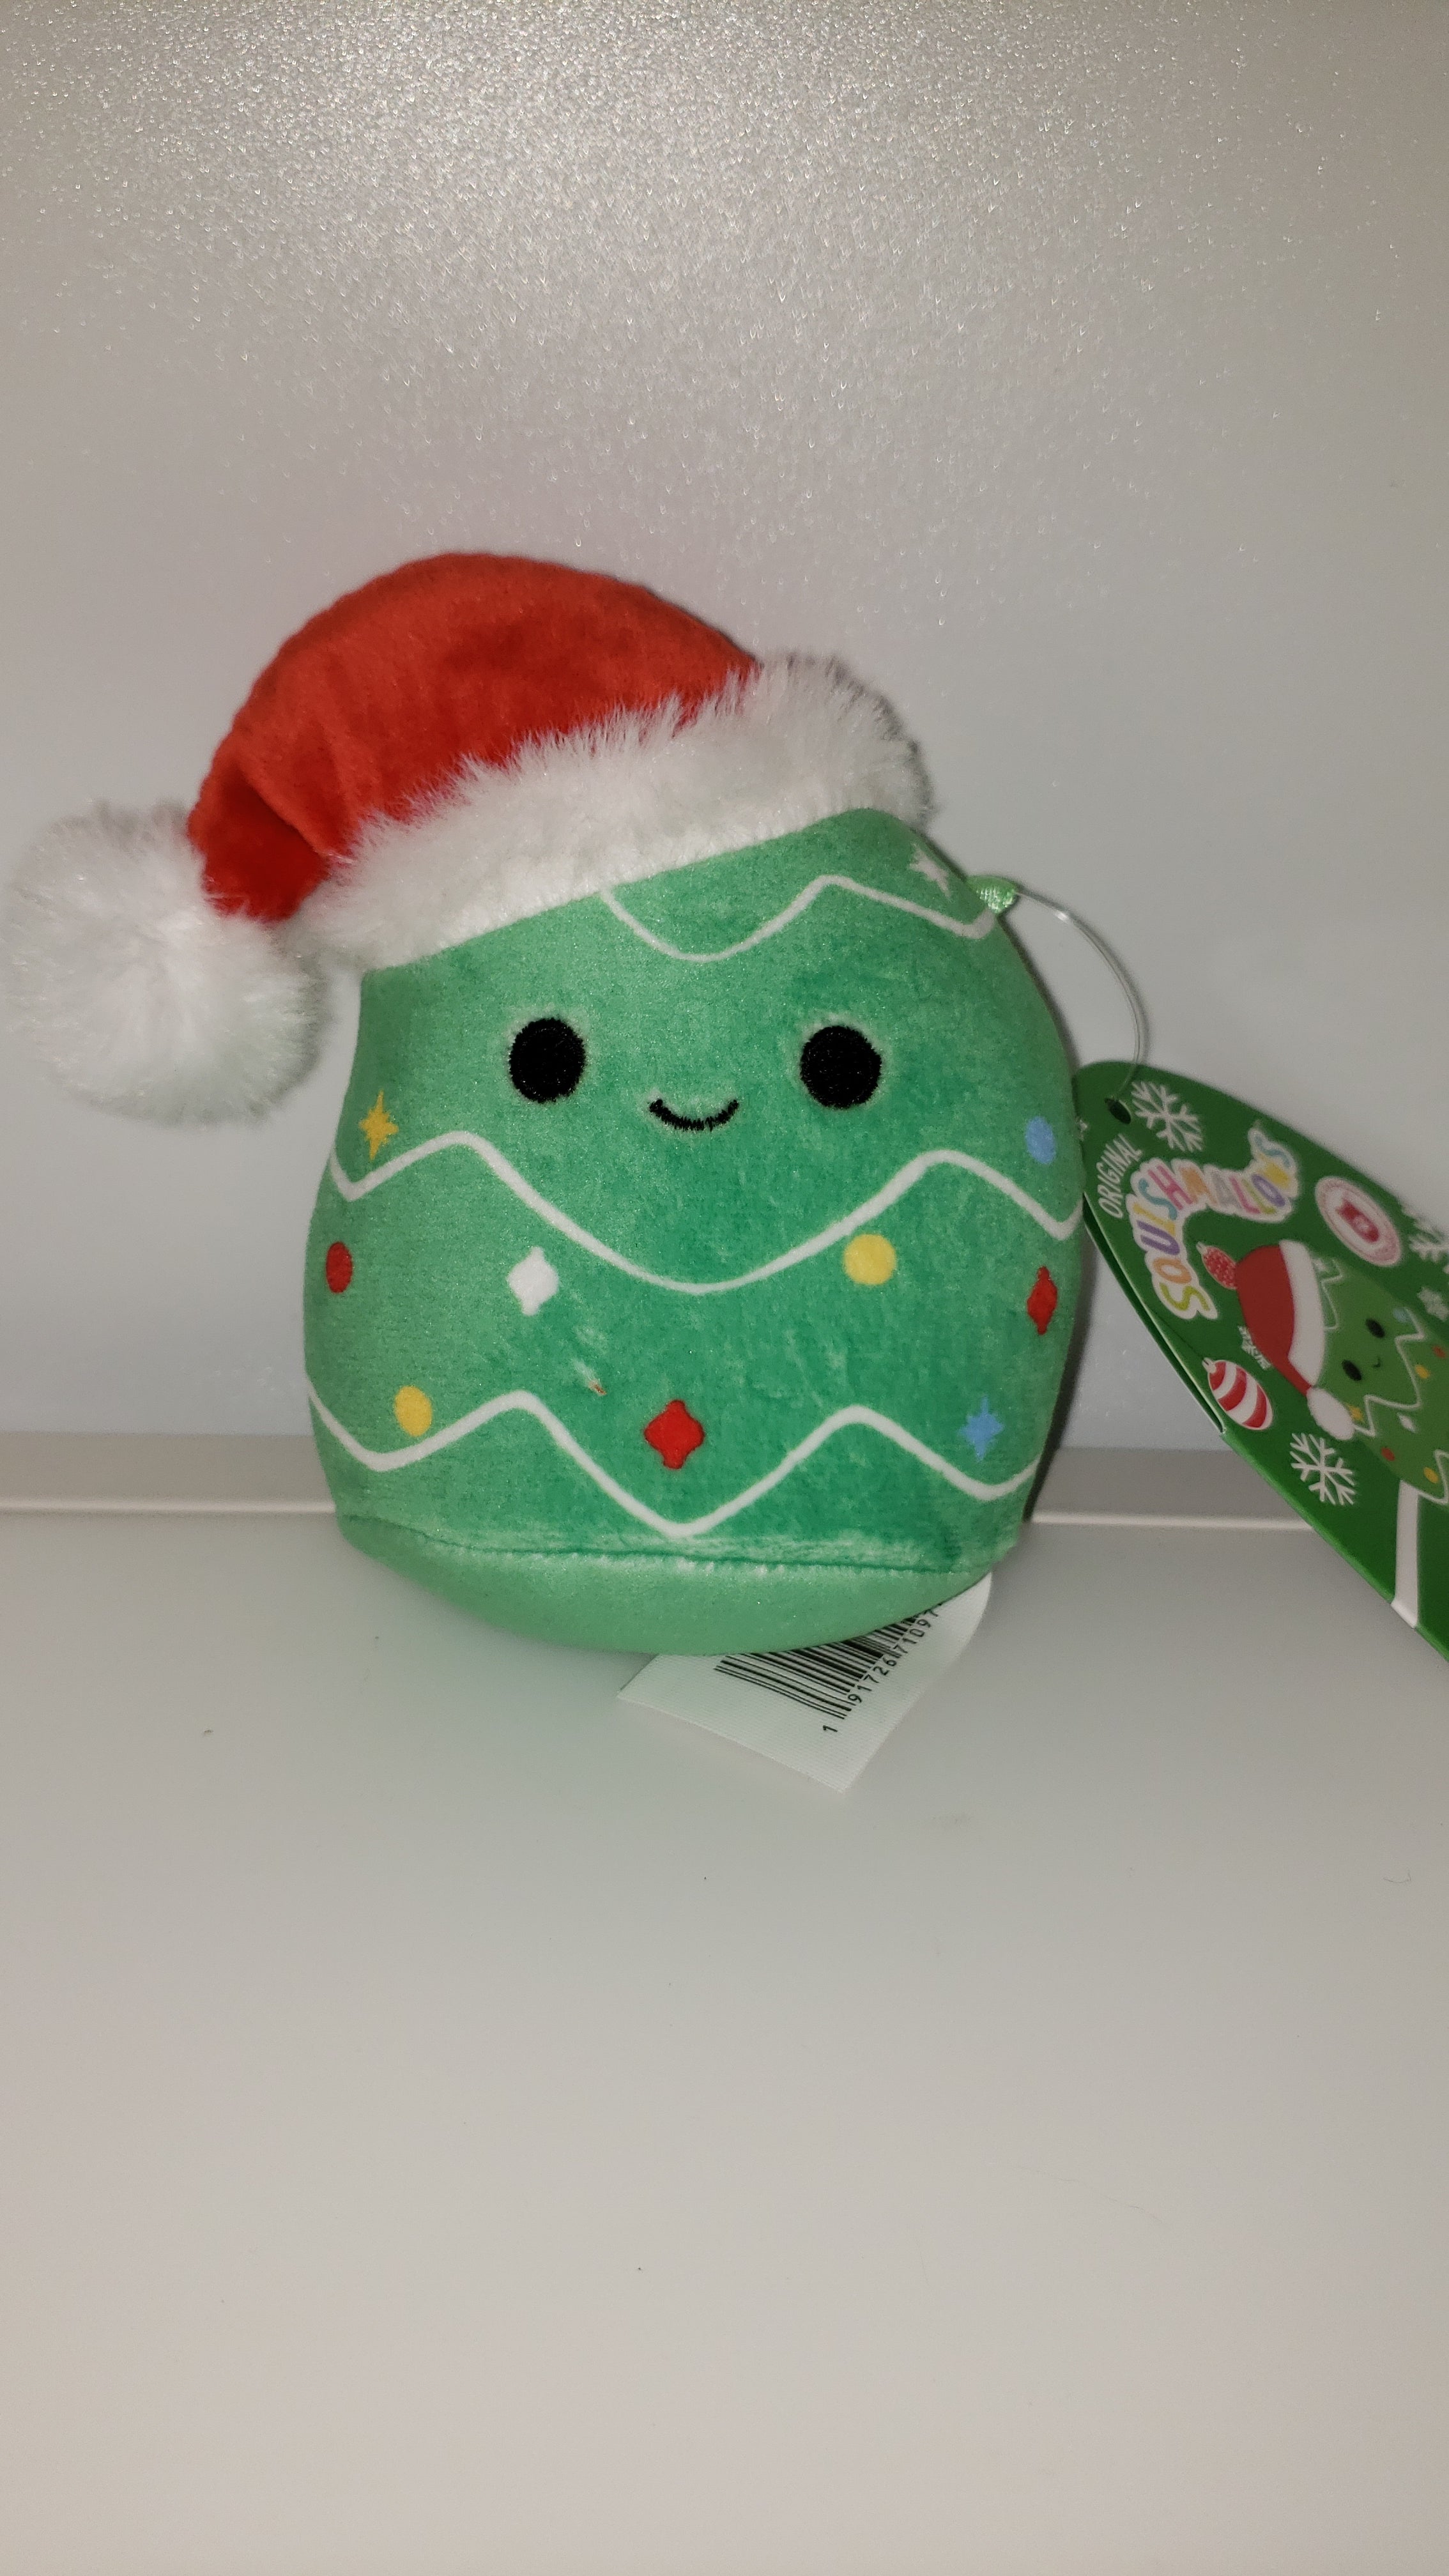 Original Squishmallow Dog Toy - Carol the Christmas tree 4.5in